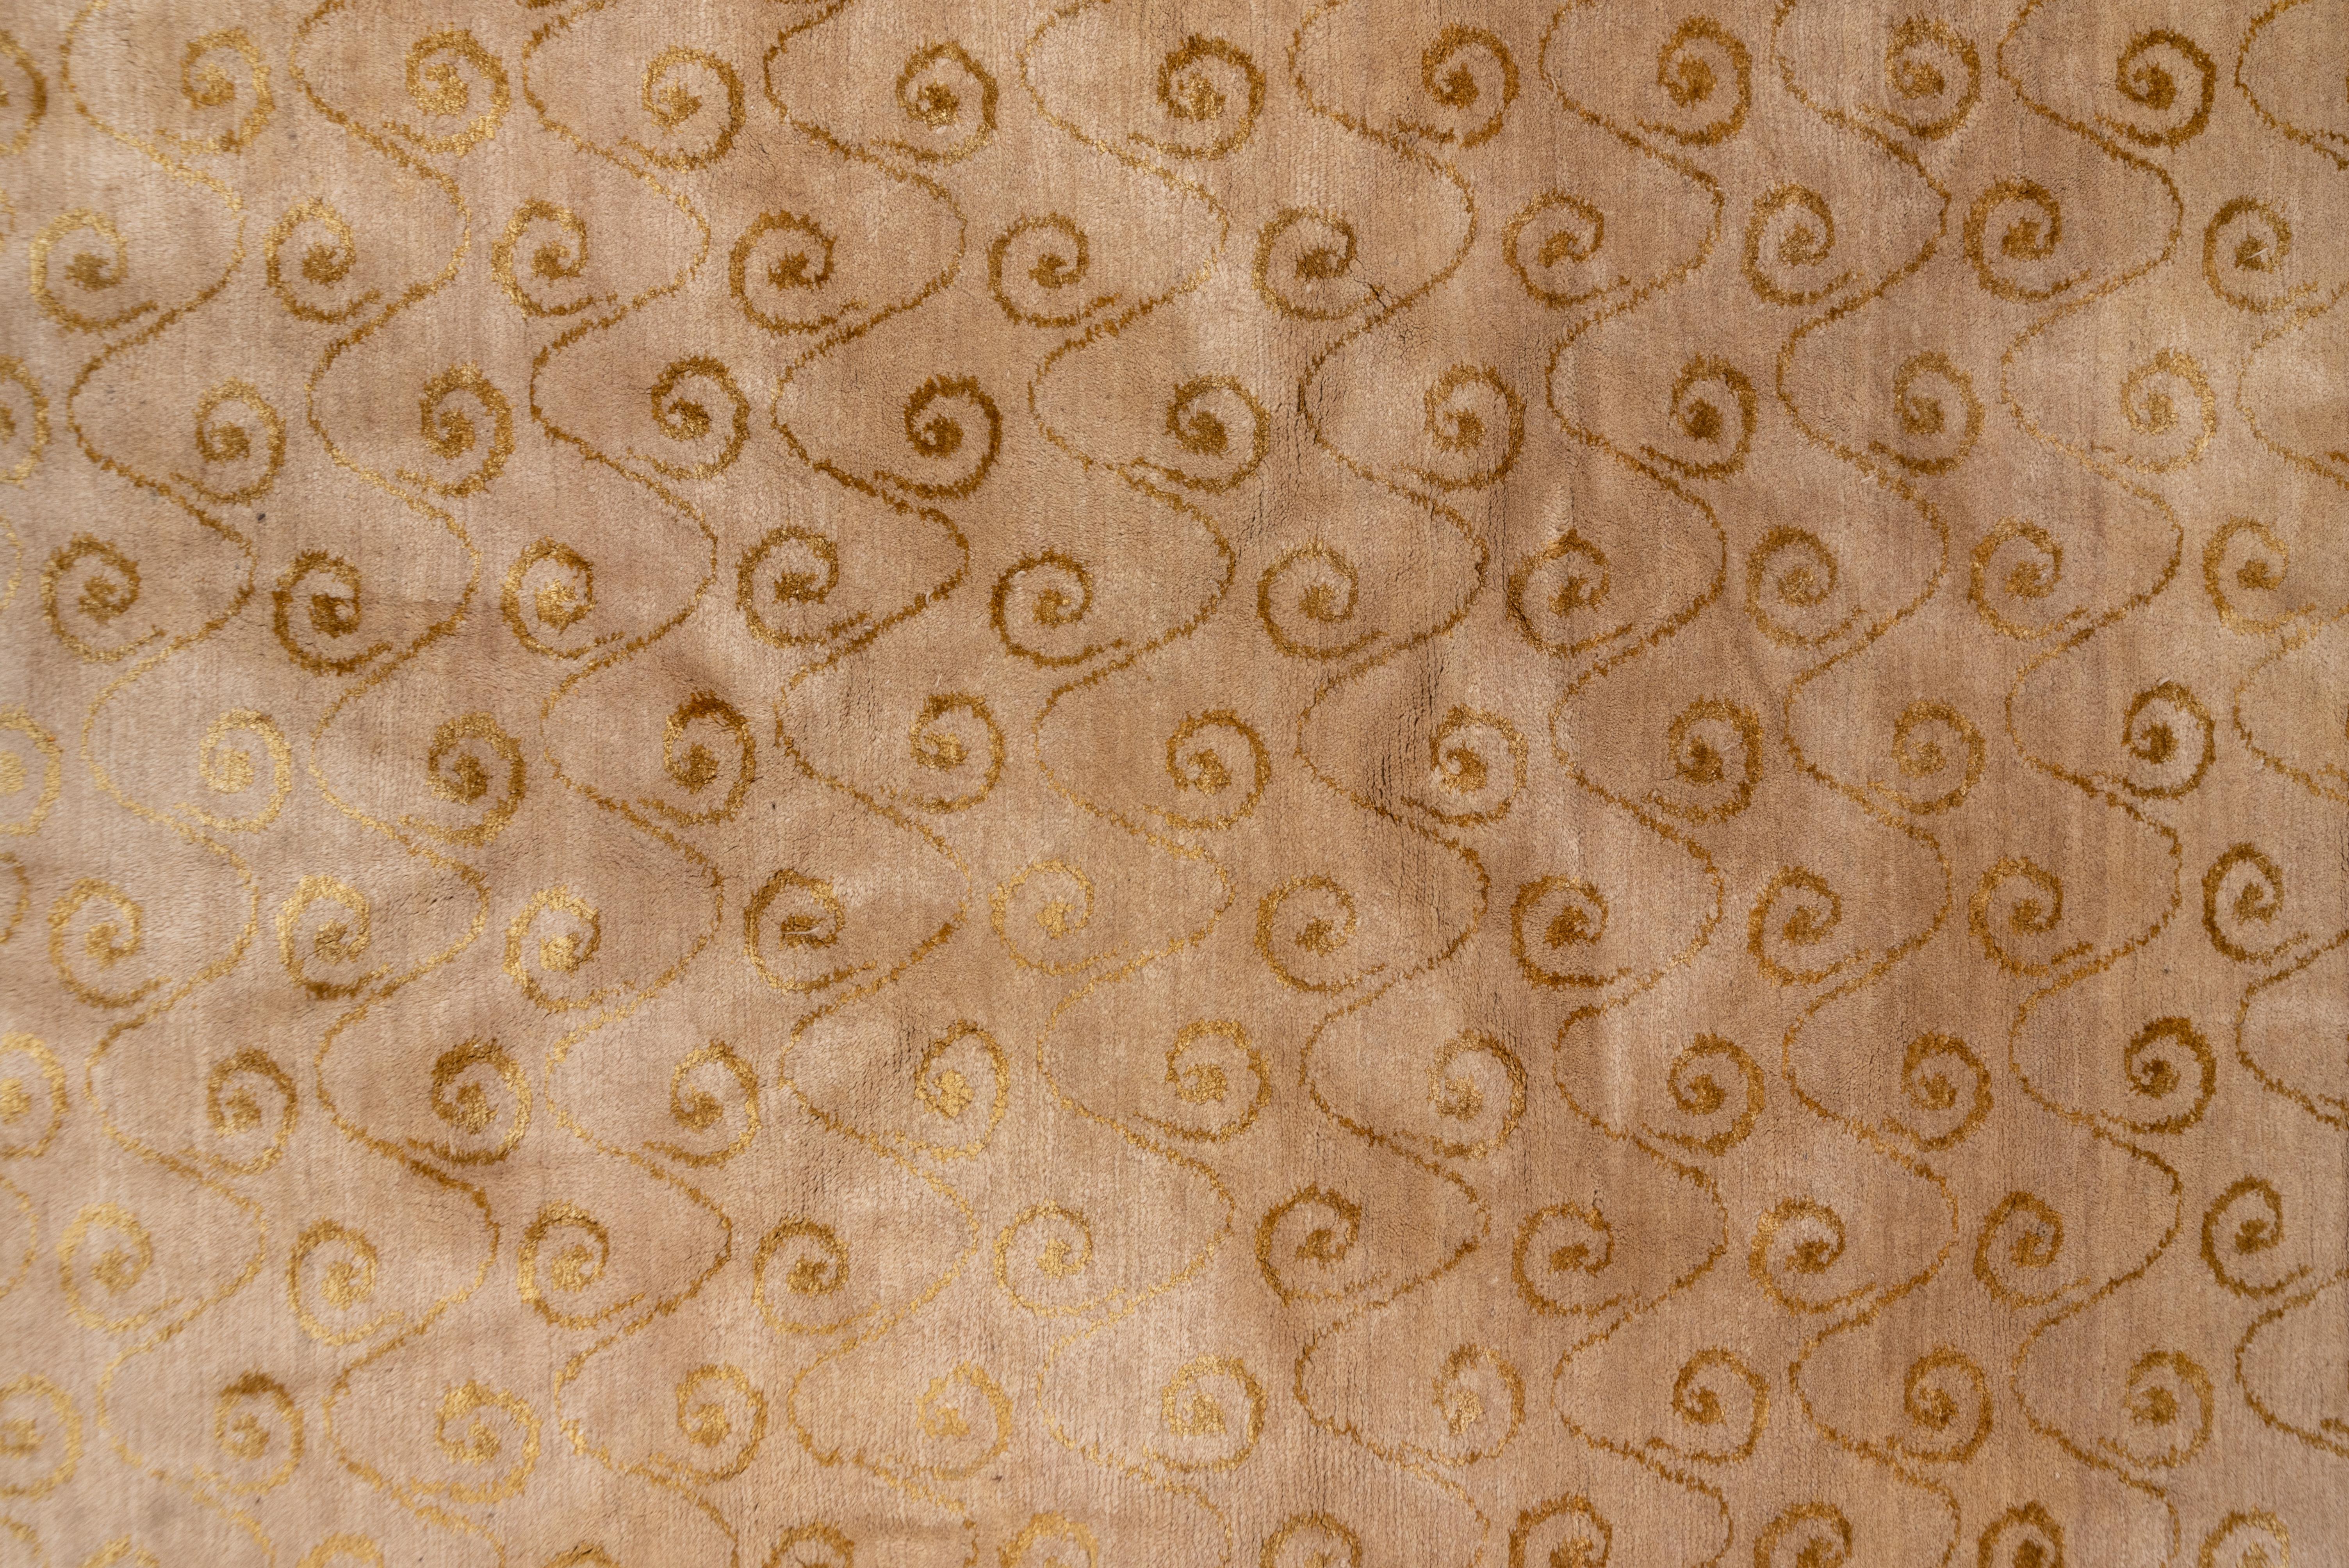 Late 20th Century Modern Tibetan Carpet with Gold Border, Gold Snail Shell Spiral Allover Field